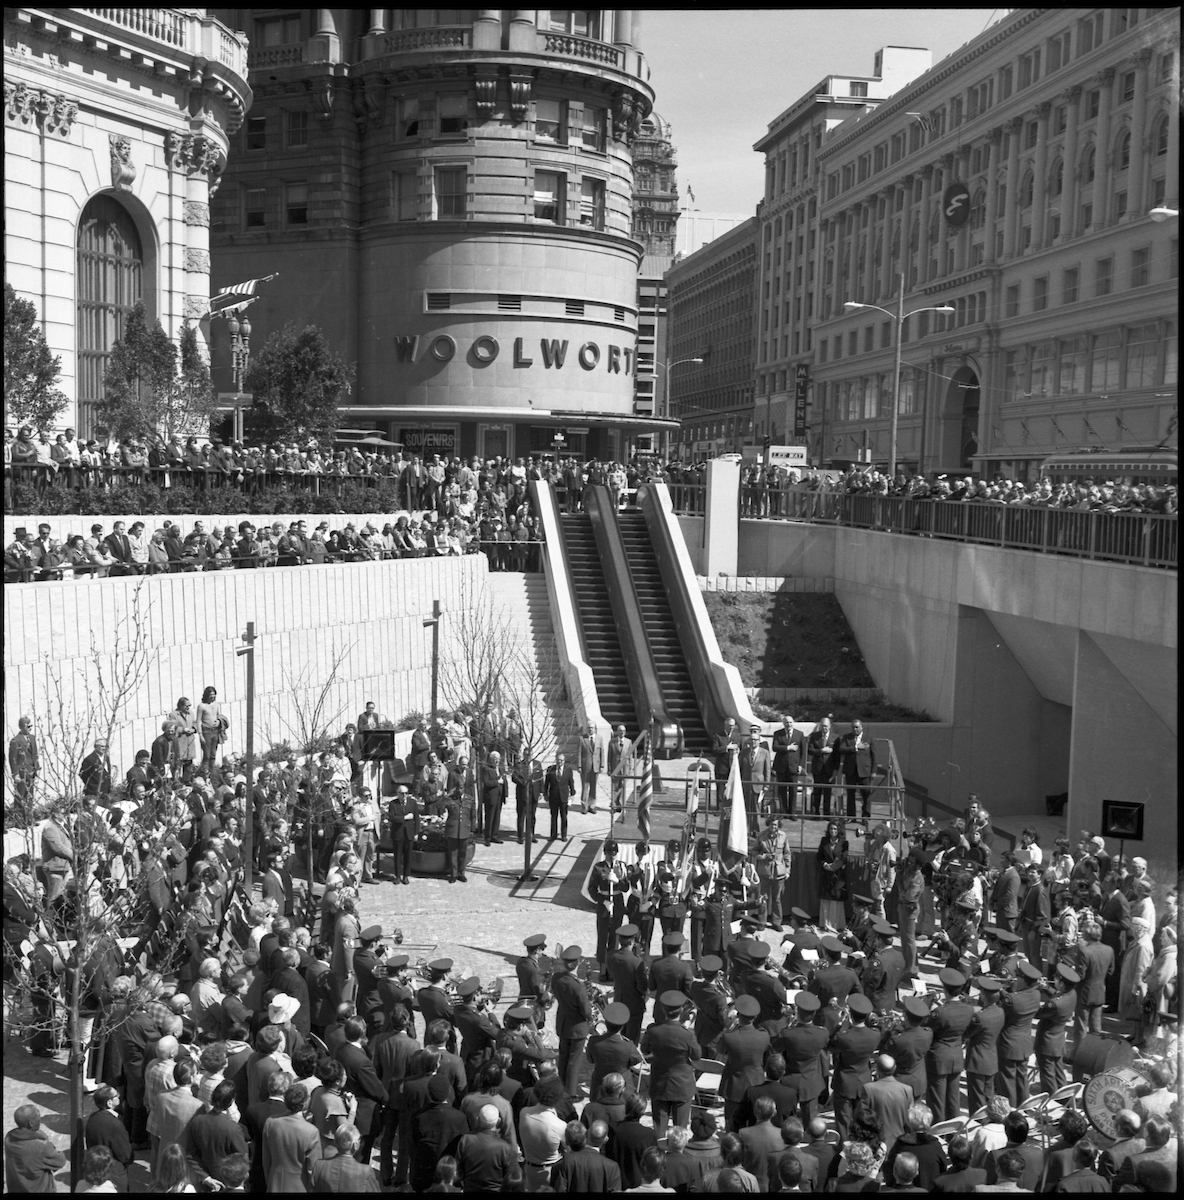 Black and white photo of a ceremony at the bottom of an escalator with crowds watching a speaker.